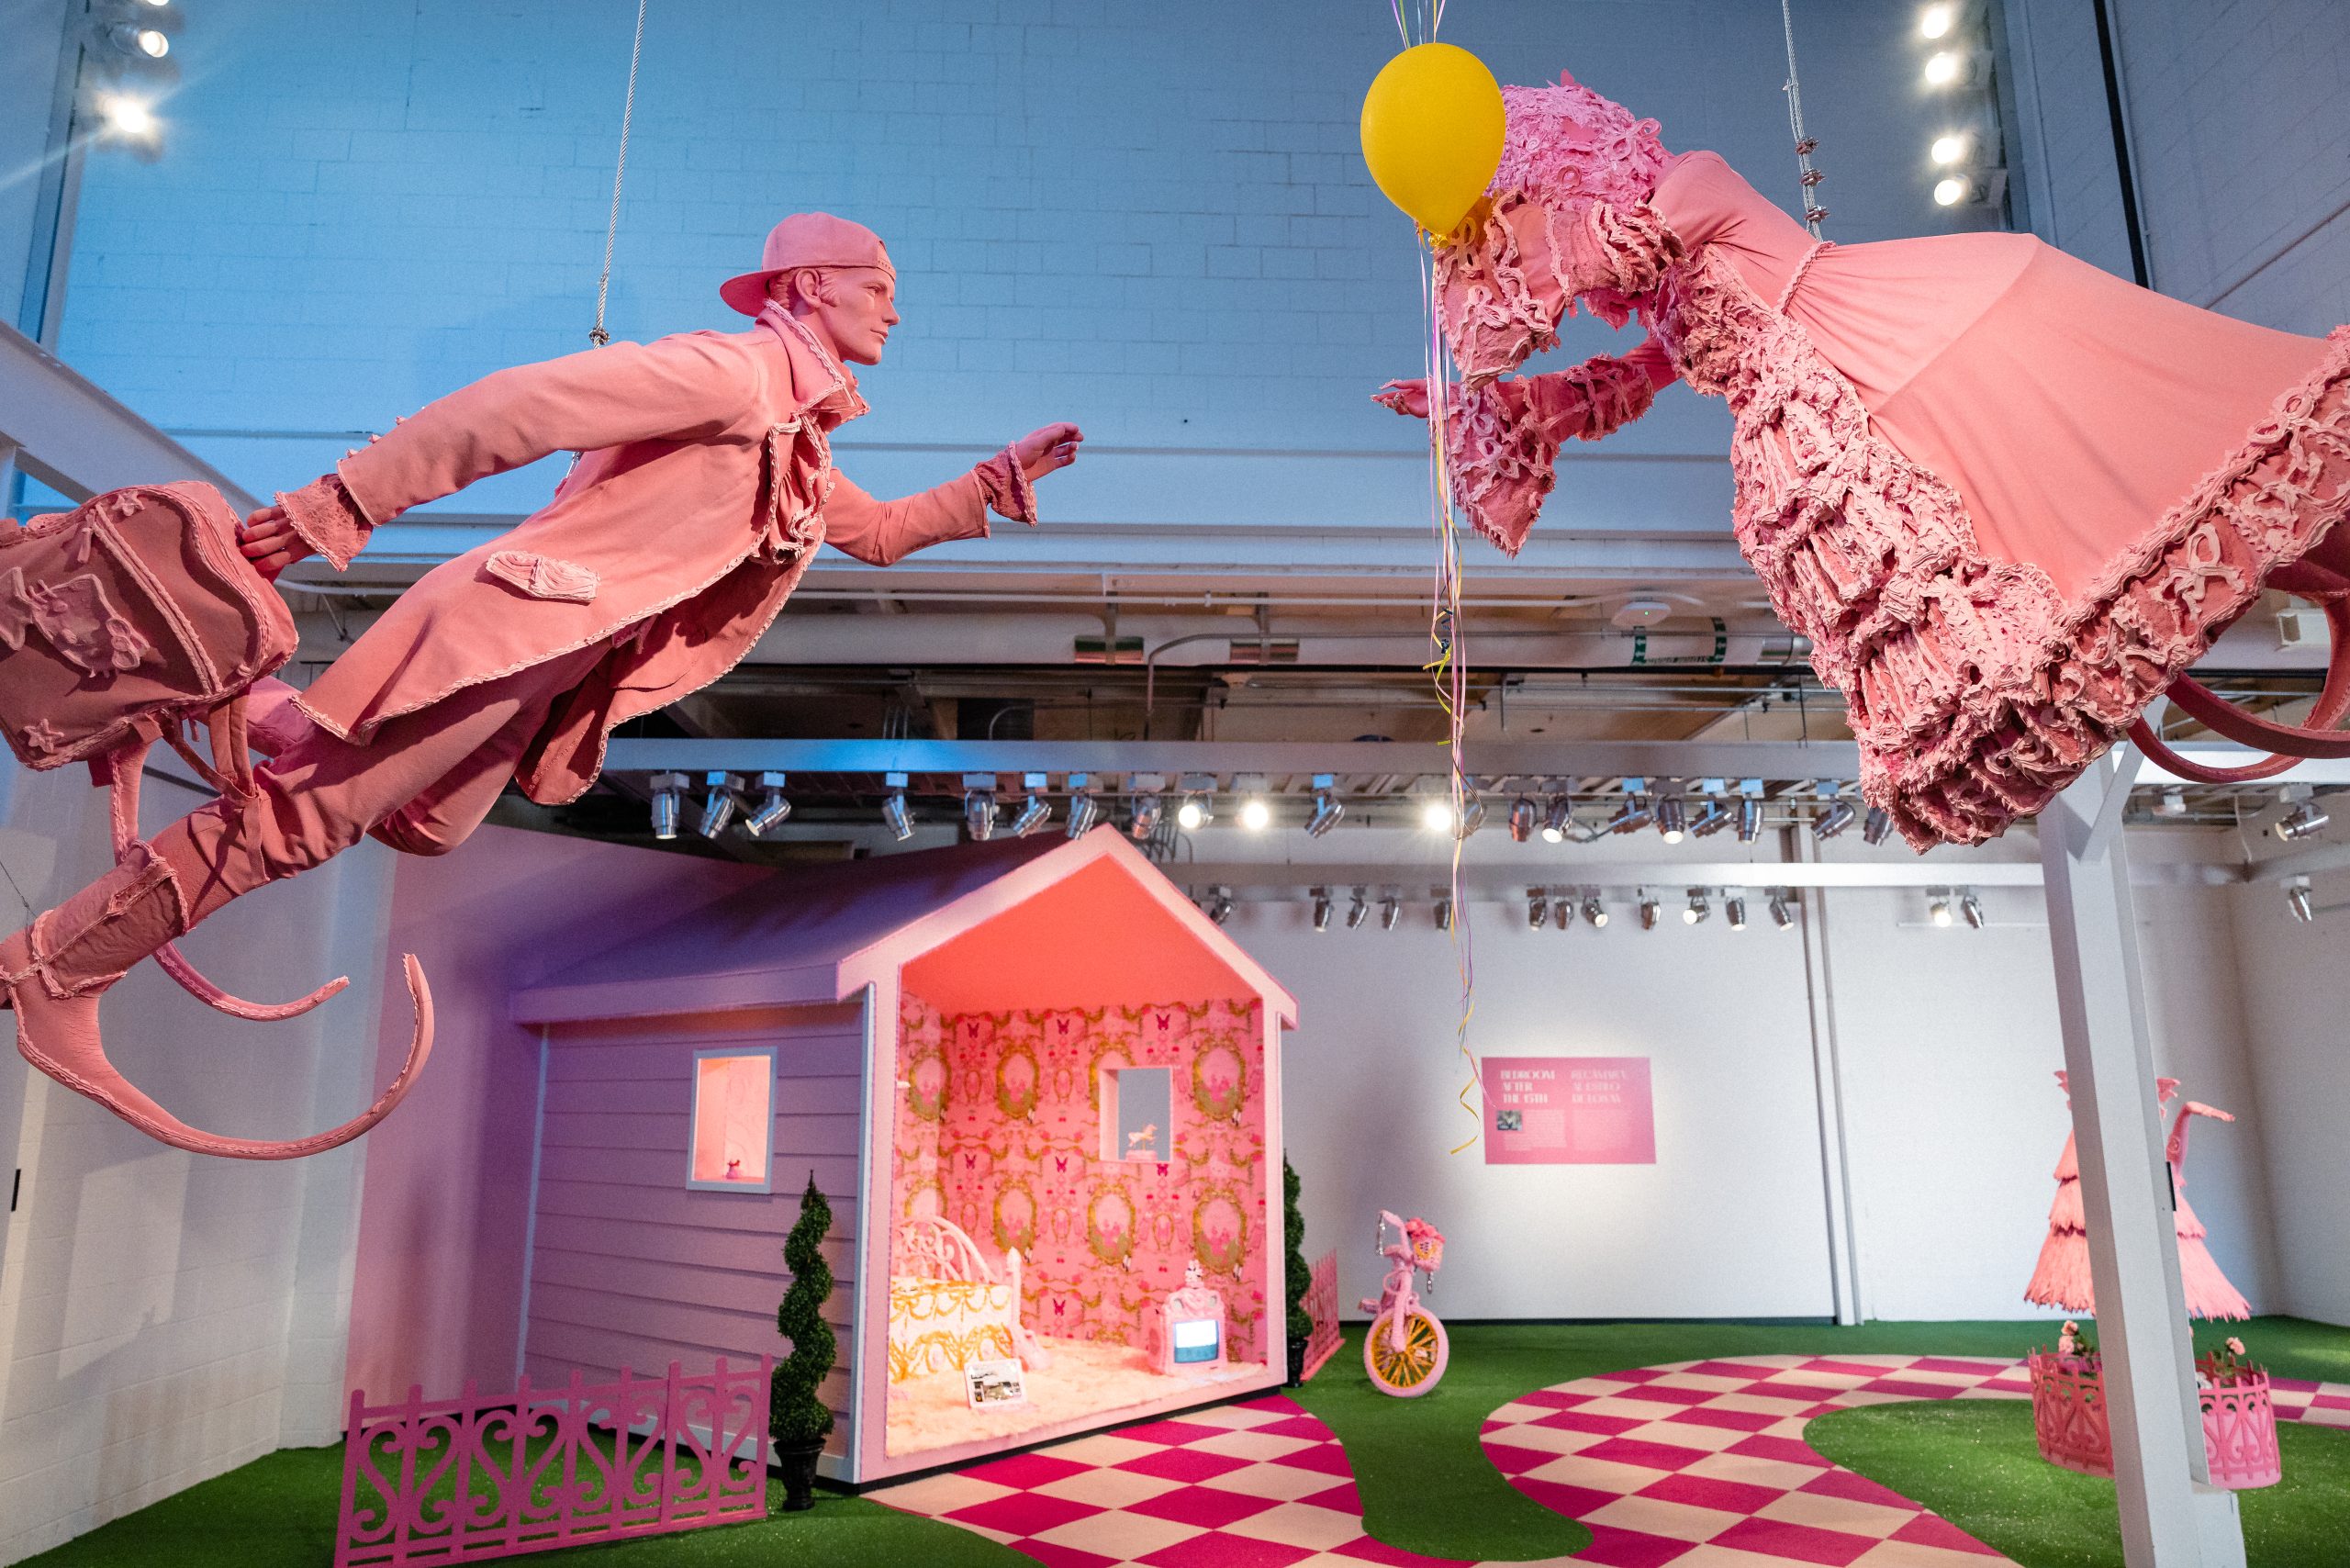 Image: Installation photo of Yvette Mayorga's What a time to be at the Momentary. Two large pink figures hang above a pink and white checked floor with strips of grassy green interspersed. On the floor is a small pink hut with one wall cut away. Image courtesy of Crystal Bridges Museum of American Art.